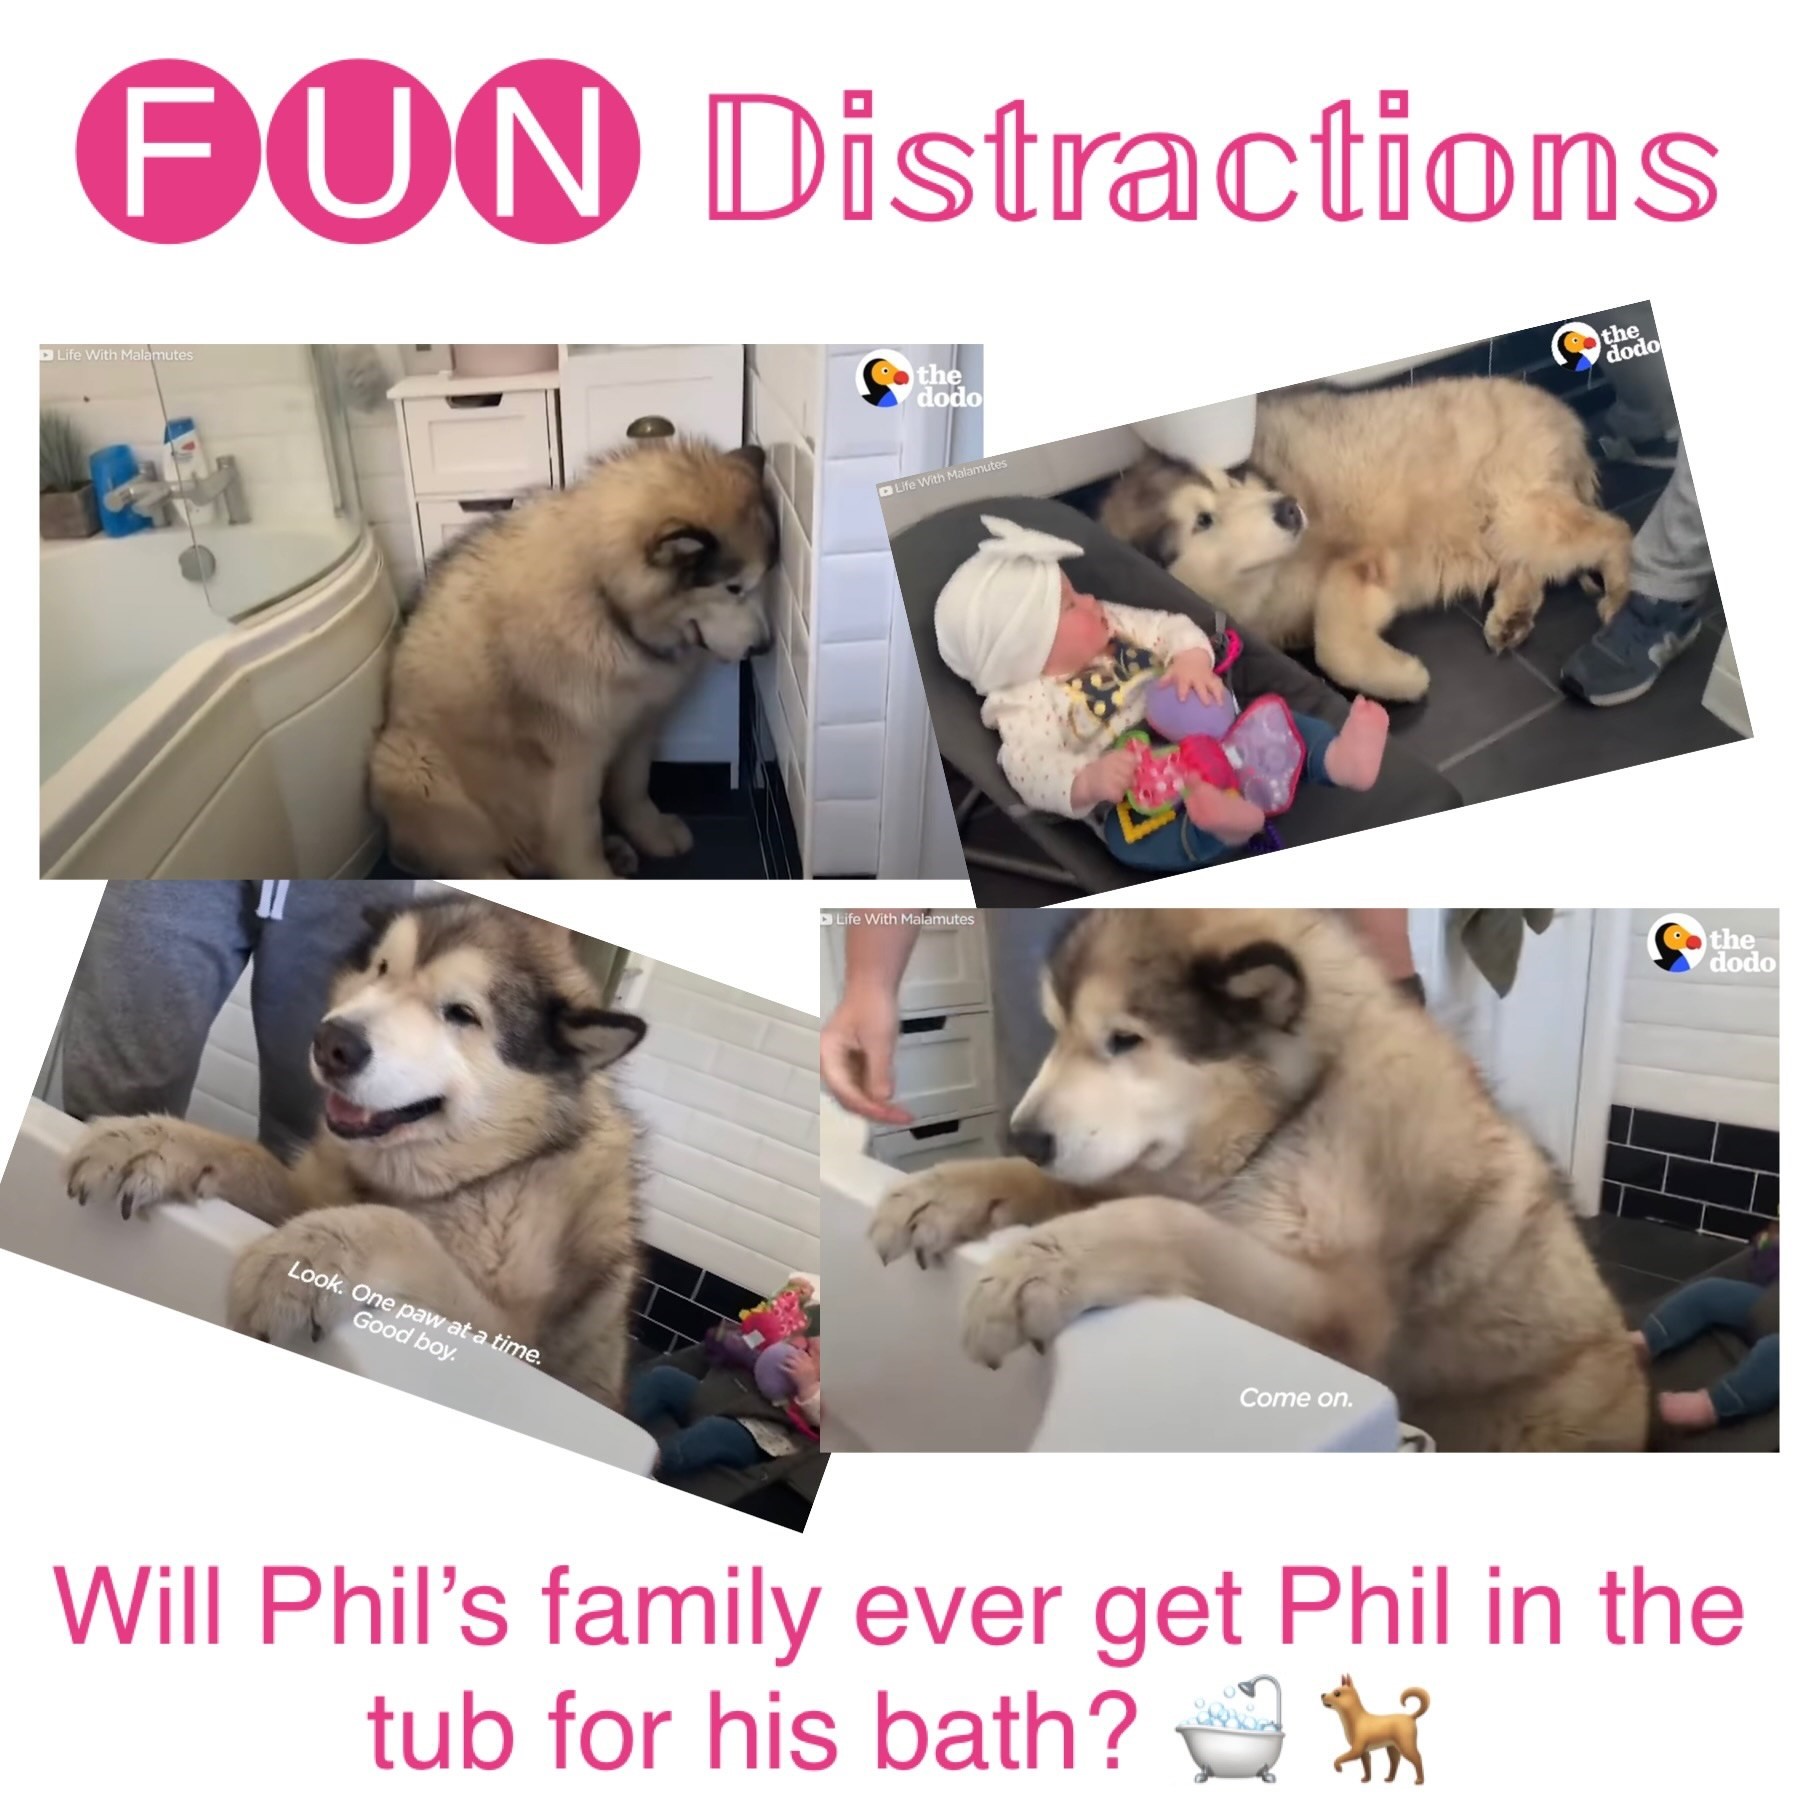 Image advertising the Library’s FUN Distractions series post about Phil taking a bath